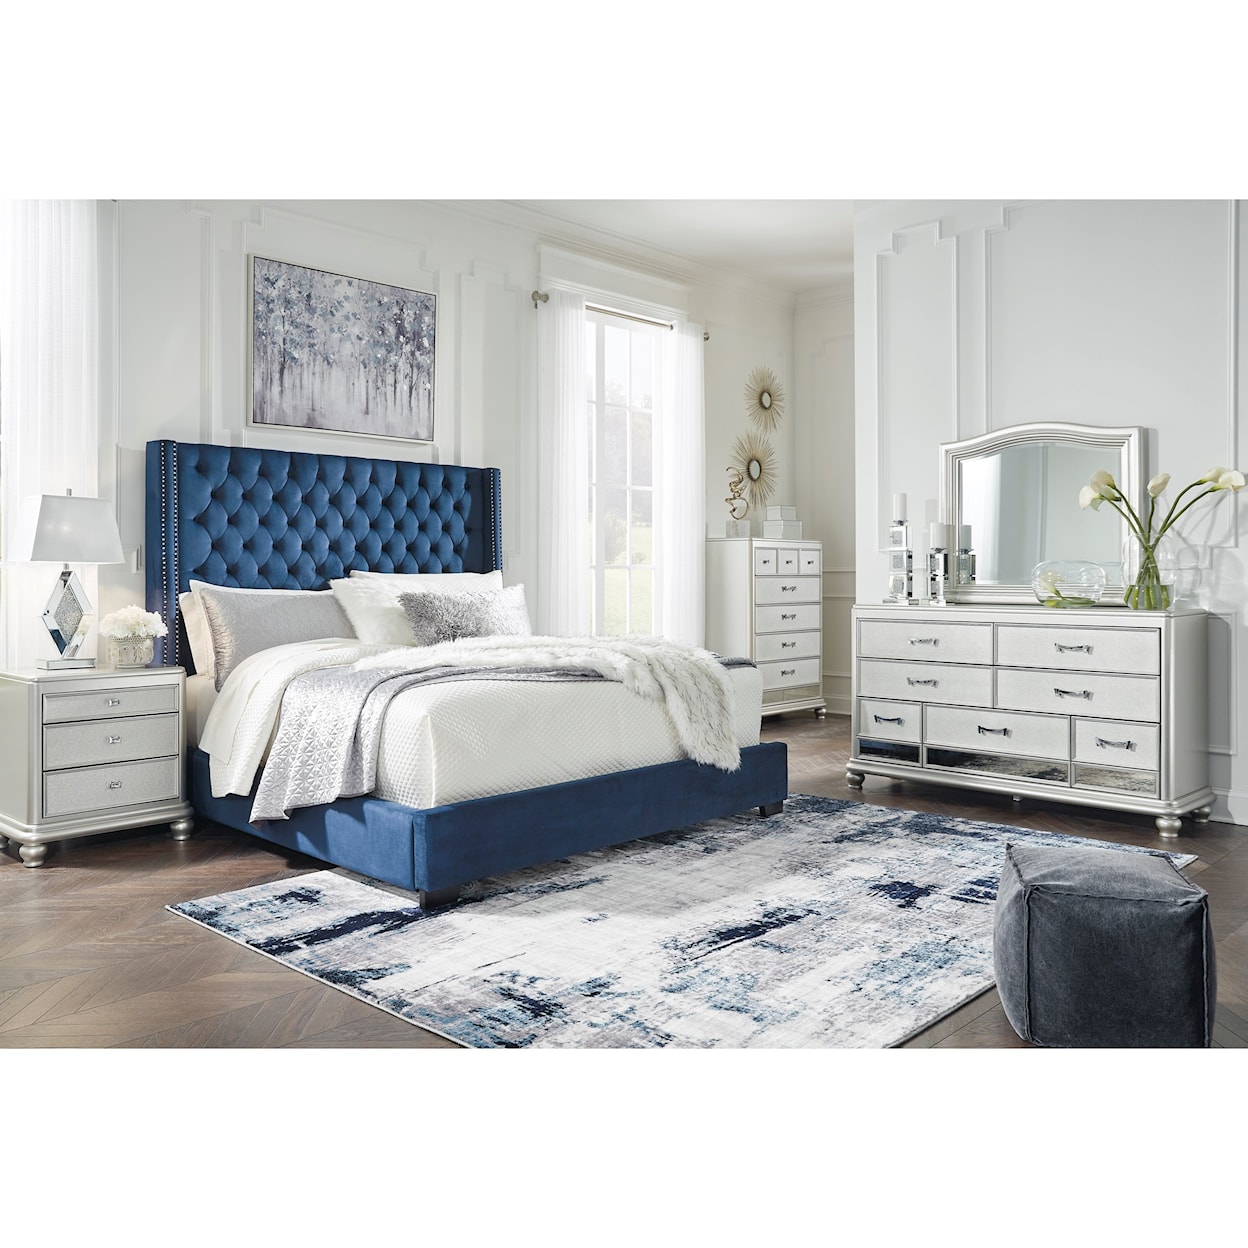 Signature Design by Ashley Coralayne California King Bedroom Group